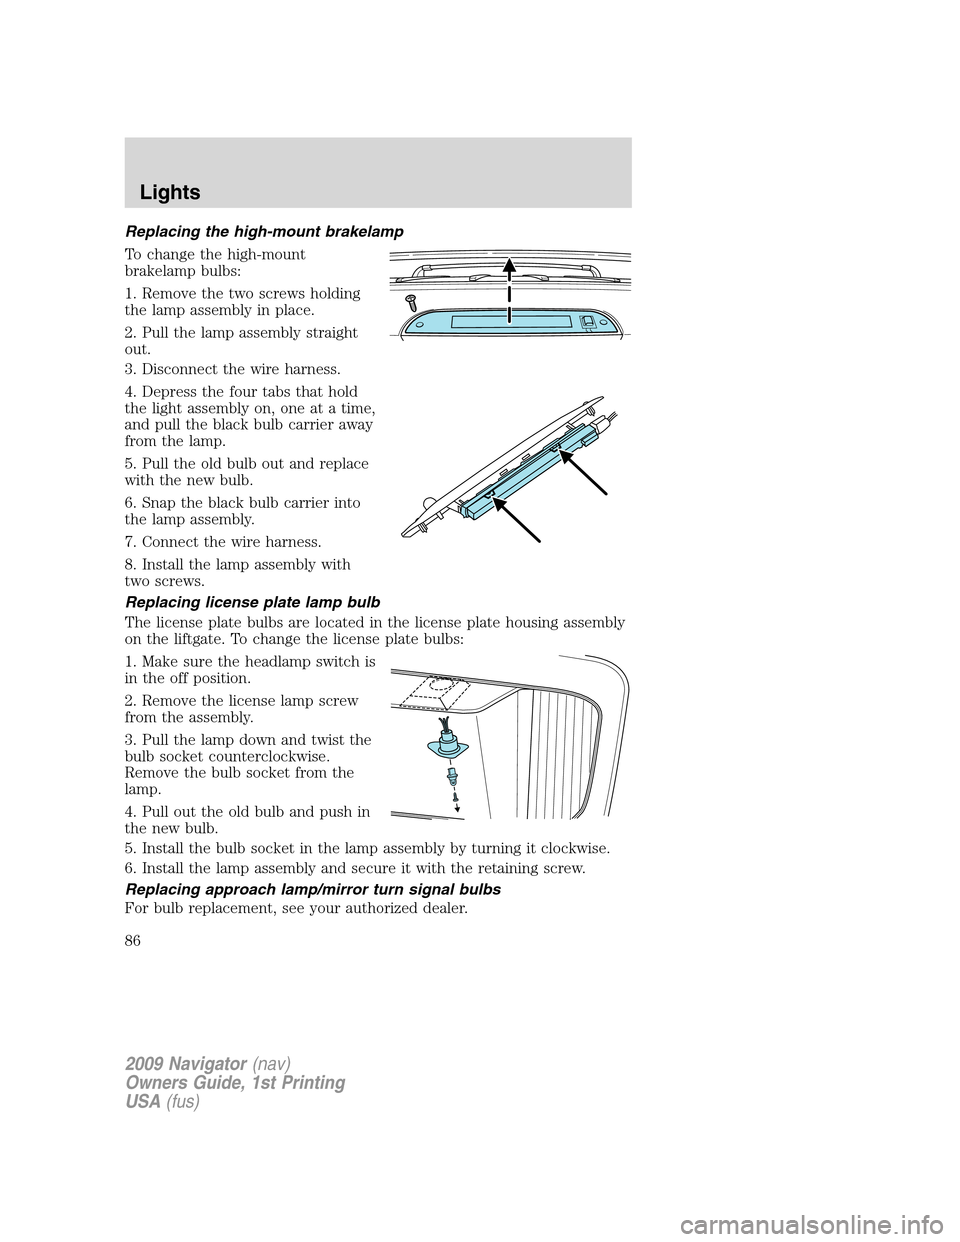 LINCOLN NAVIGATOR 2009  Owners Manual Replacing the high-mount brakelamp
To change the high-mount
brakelamp bulbs:
1. Remove the two screws holding
the lamp assembly in place.
2. Pull the lamp assembly straight
out.
3. Disconnect the wire